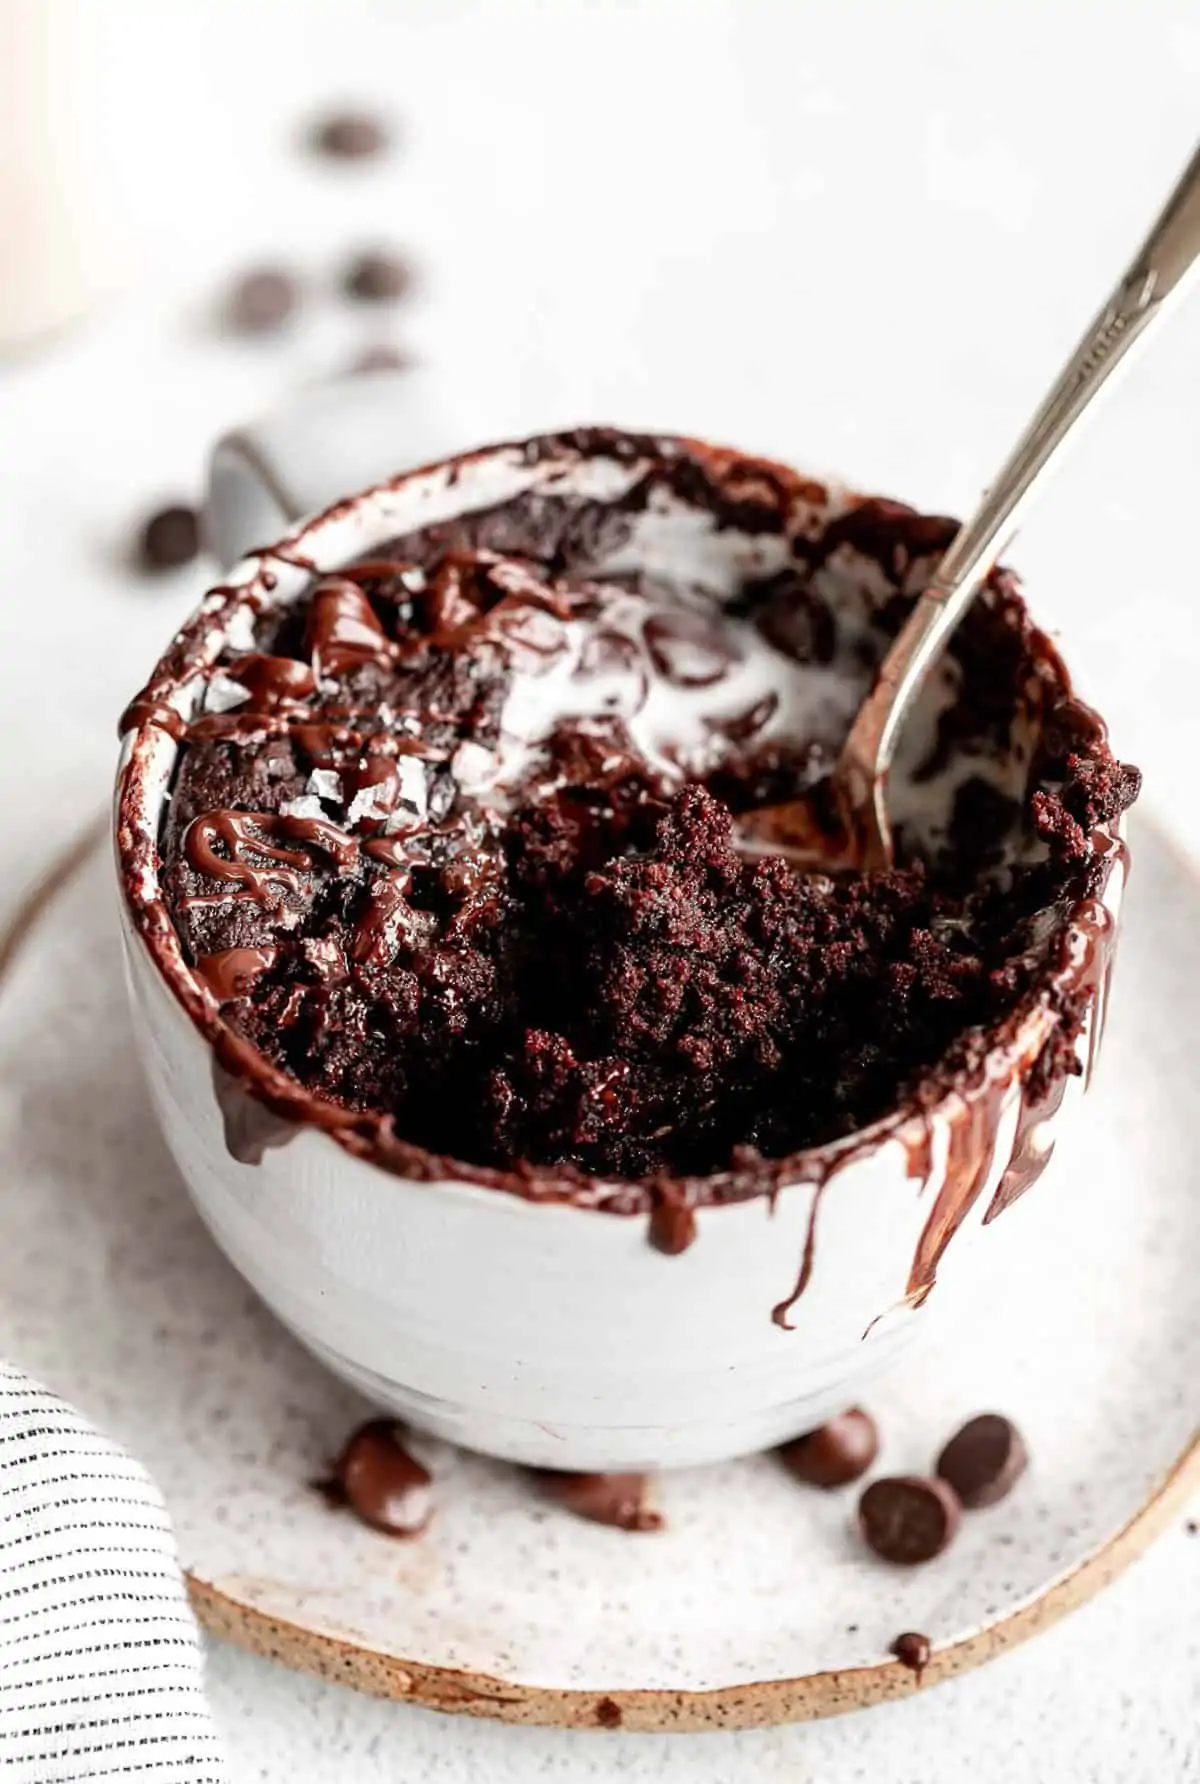 showing the texture of the mug cake with chocolate chips